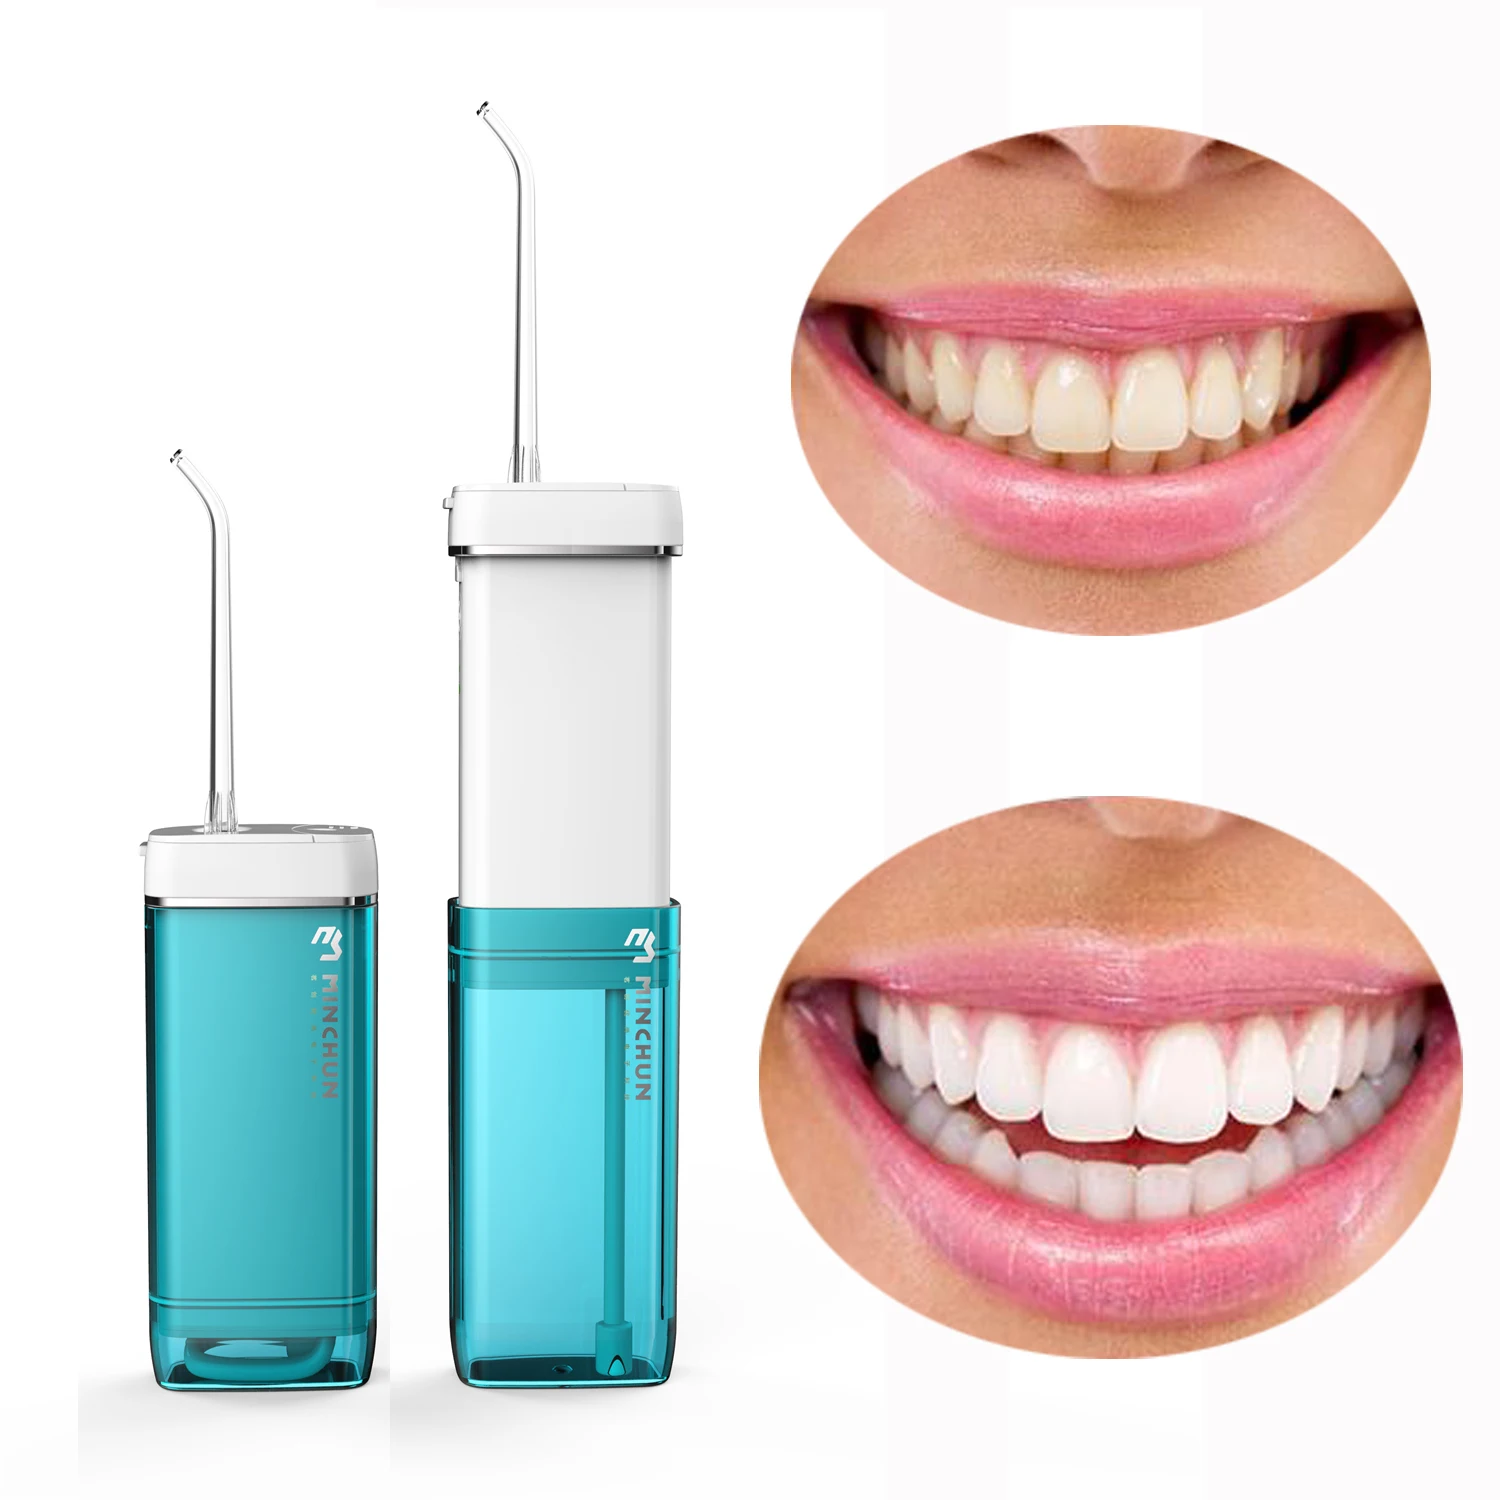 

USB Rechargeable Electric Pulse Water Jet Oral Irrigator Dental Cordless Plus Teeth Water Flosser Portable, White/pink/blue